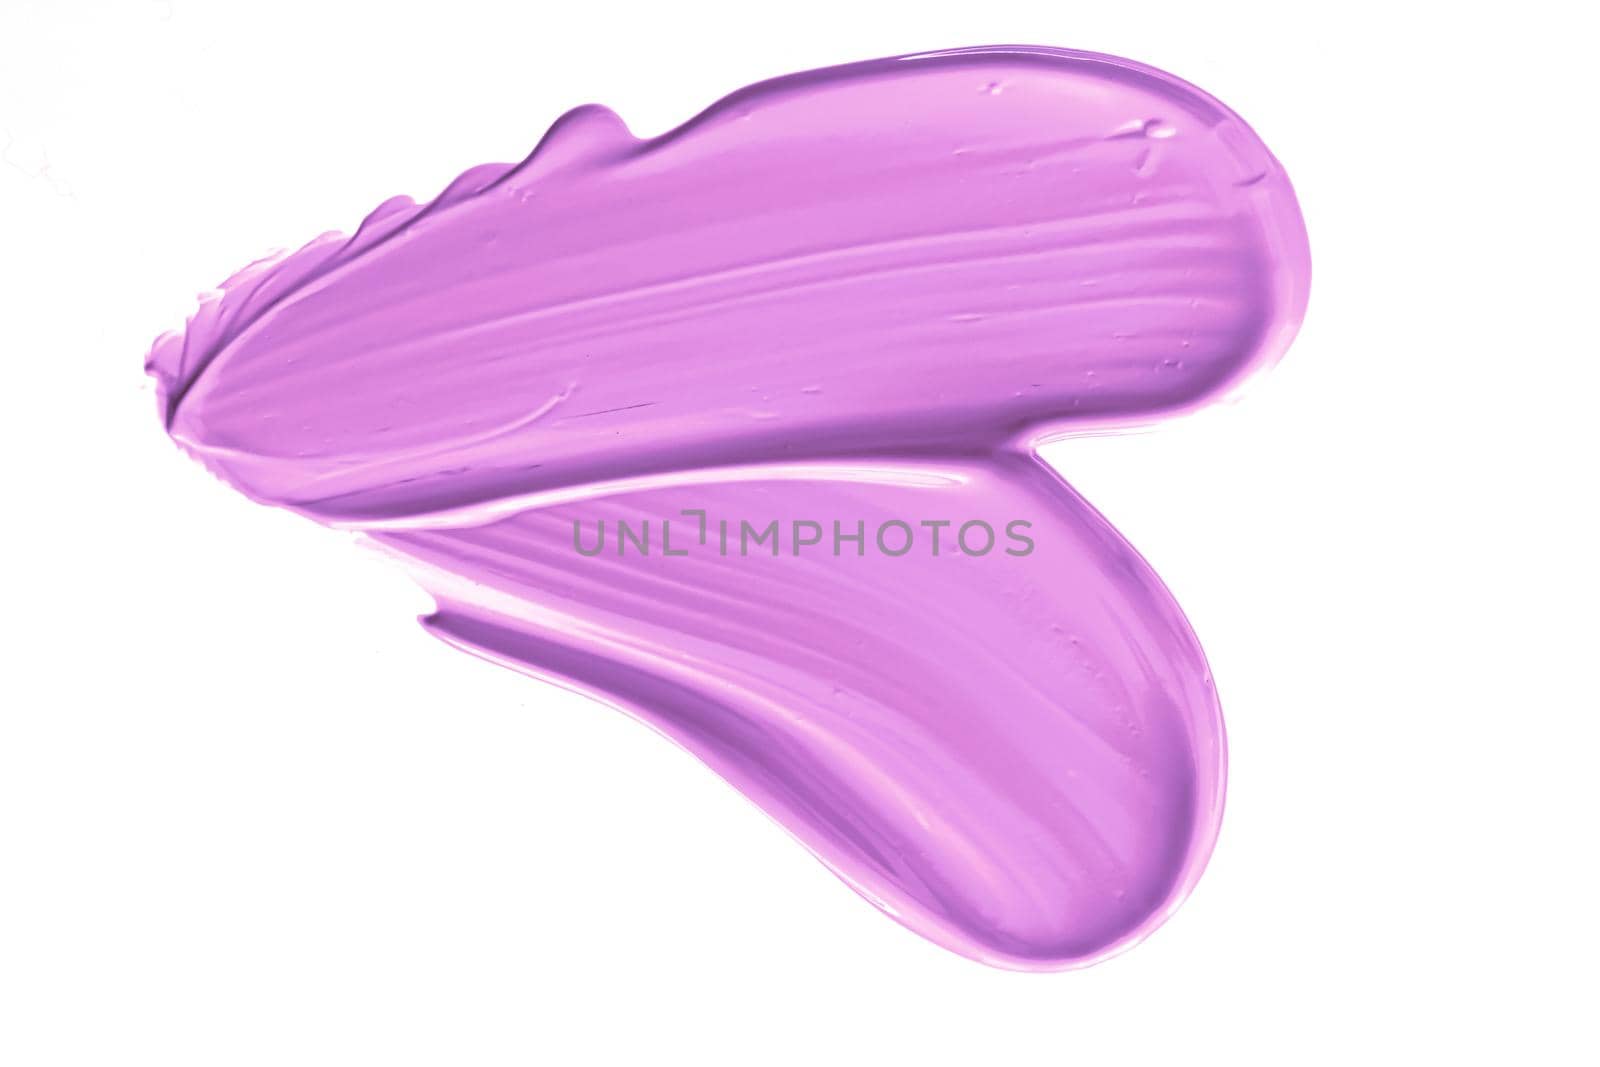 Pastel purple beauty swatch, skincare and makeup cosmetic product sample texture isolated on white background, make-up smudge, cream cosmetics smear or paint brush stroke by Anneleven